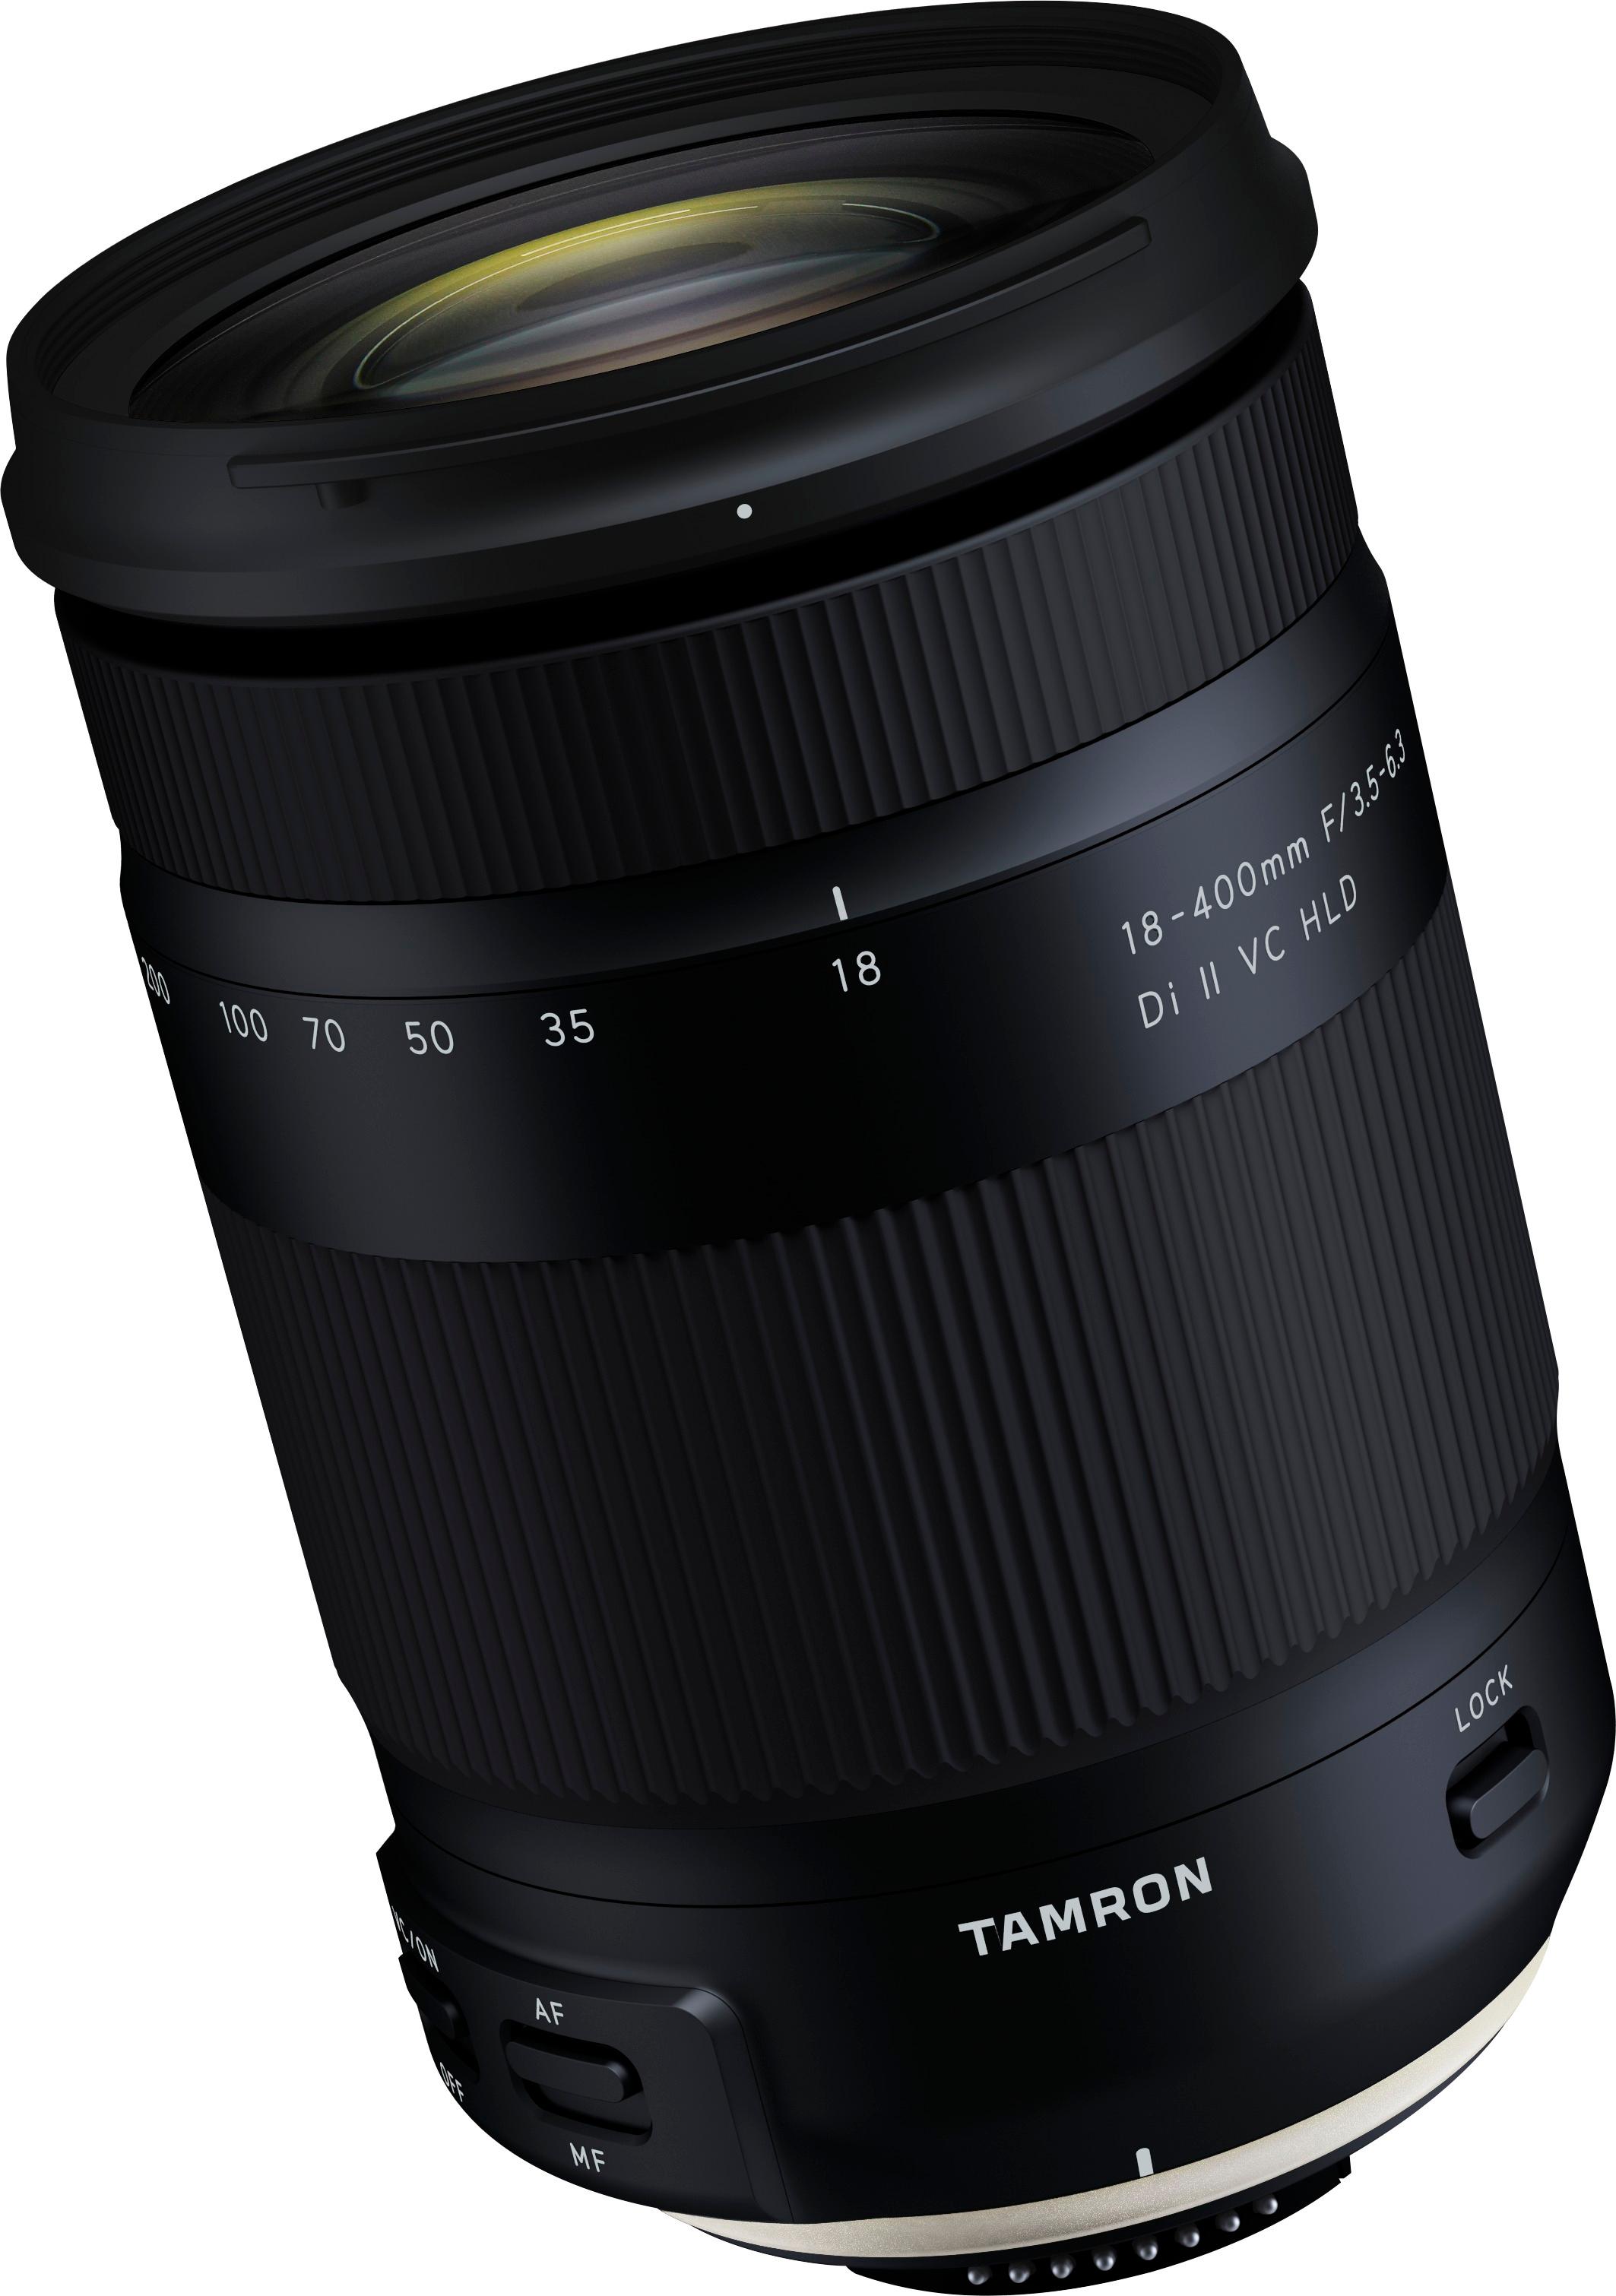 Angle View: Tamron - SP 70-200mm F/2.8 Di VC USD G2 Telephoto Zoom Lens for Canon DSLR - black